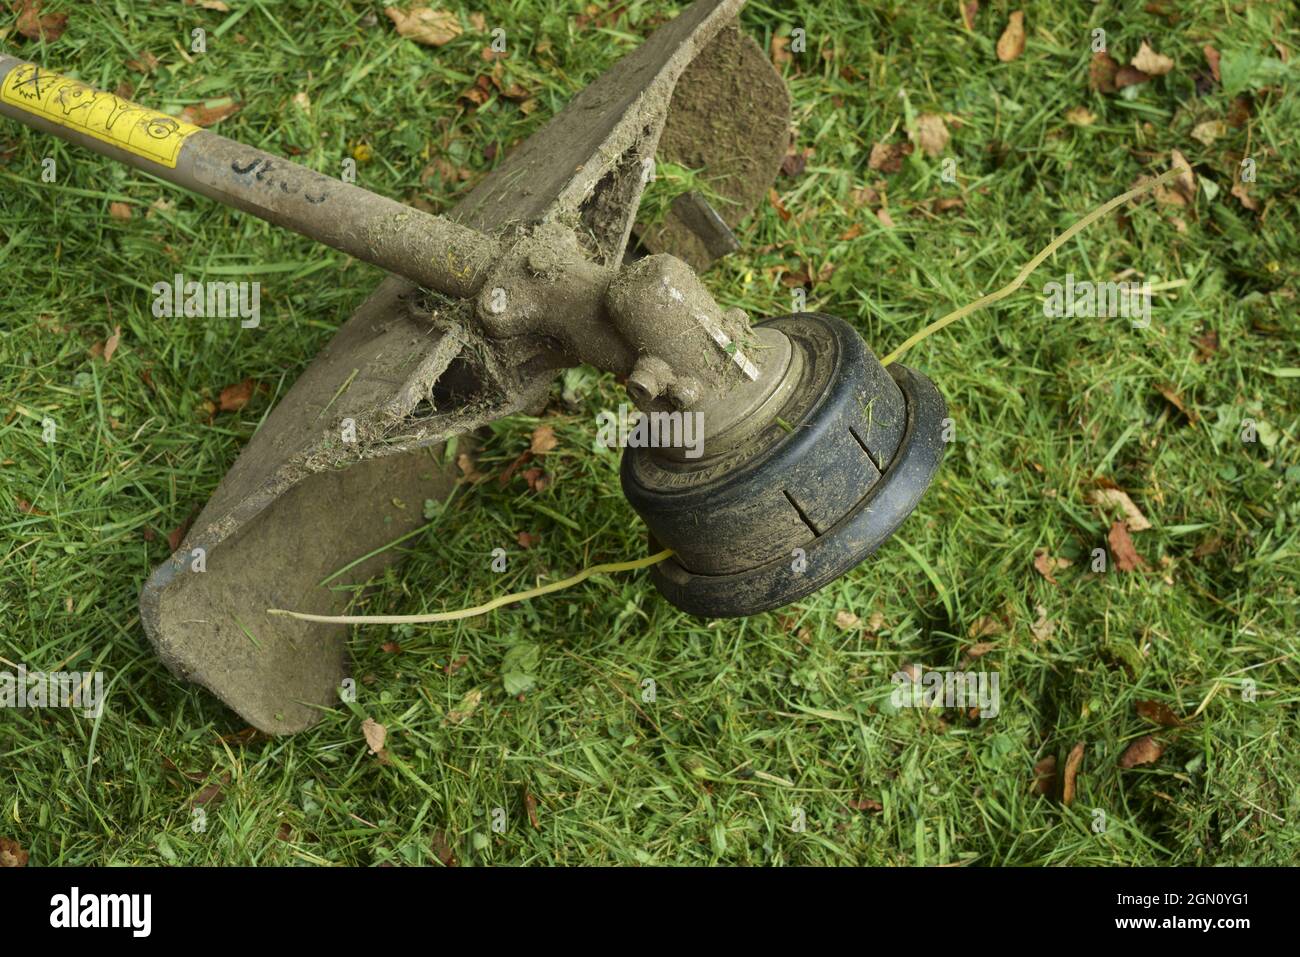 A garden strimmer with grass cuttings. Stock Photo